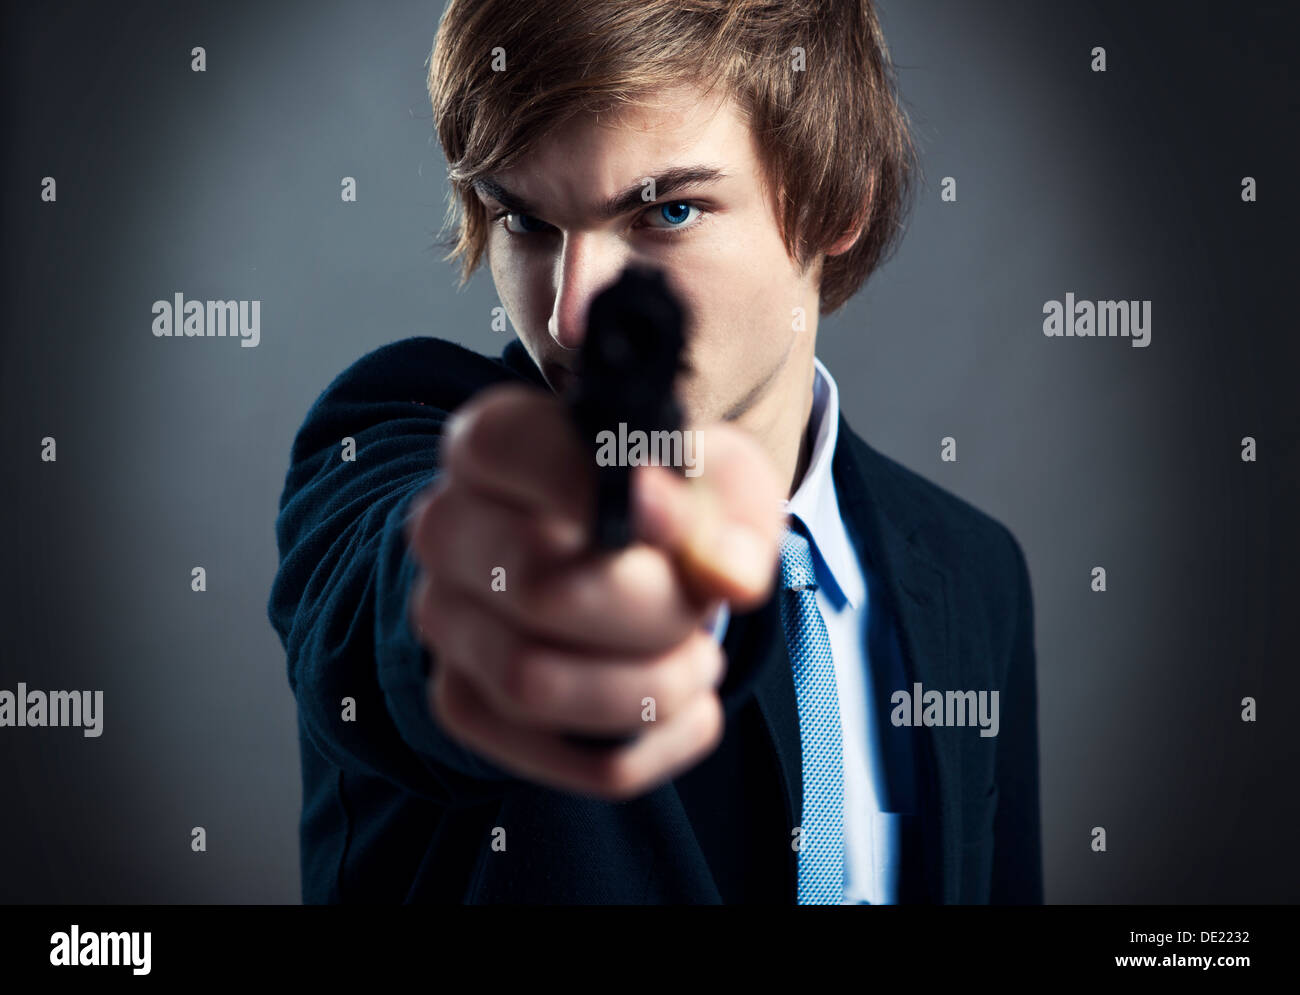 Stressed businessman holding and pointing a gun to the camera Stock Photo